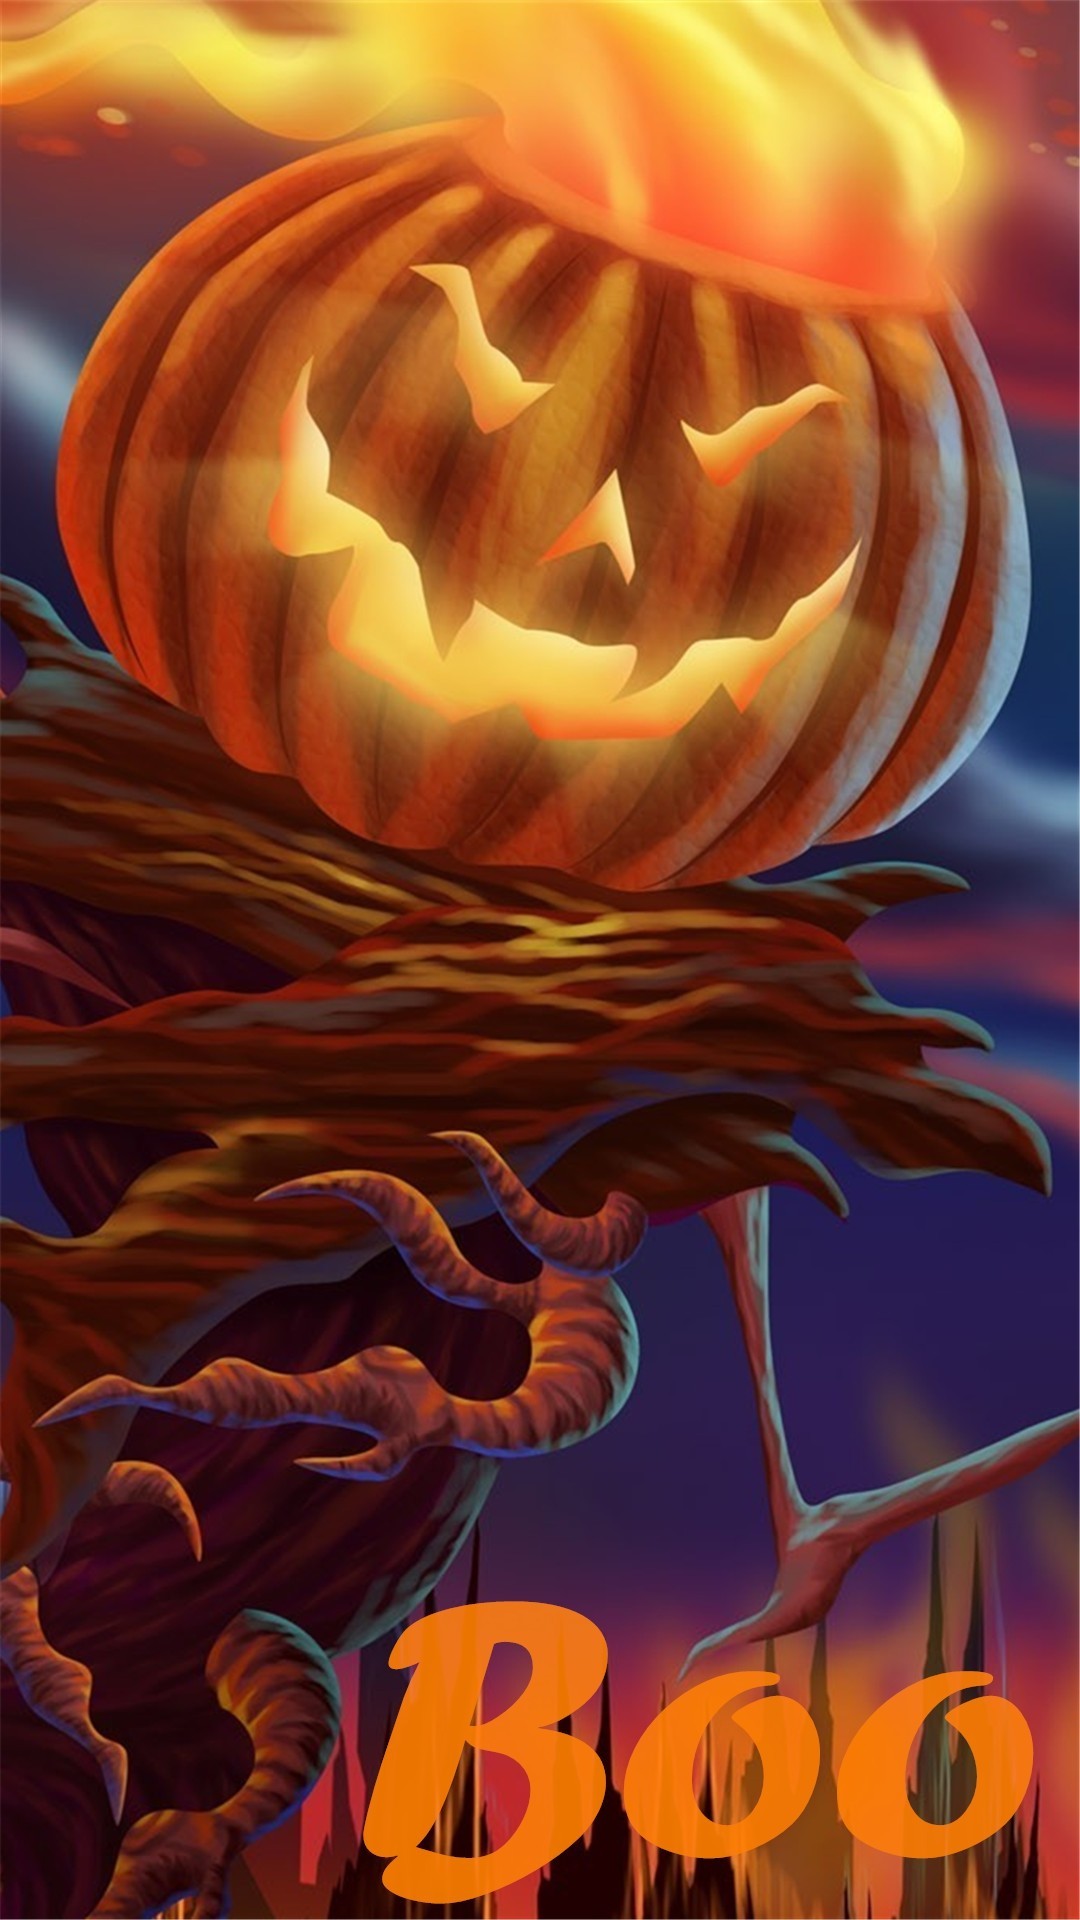 1080x1920 Today's post is scary Halloween 2012 HD wallpapers of Pumpkins, witches,  spider web, Bats and ghosts for you. Color your desktop by these wallpapers.